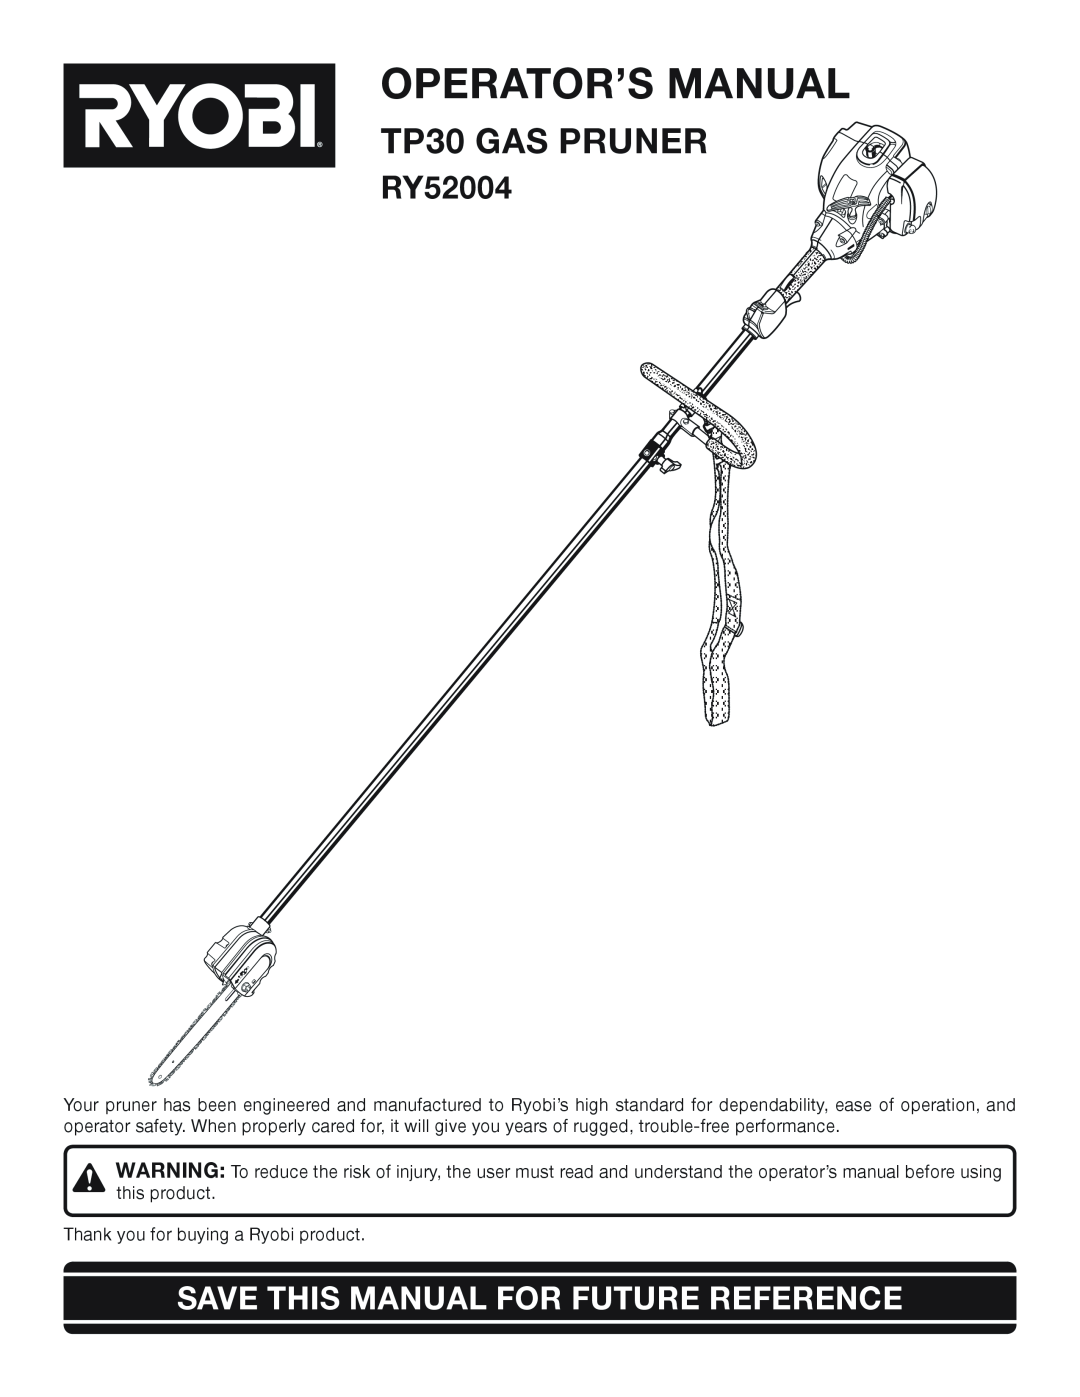 Ryobi RY52004 manual Operator’S Manual, TP30 GAS PRUNER, Save This Manual For Future Reference 